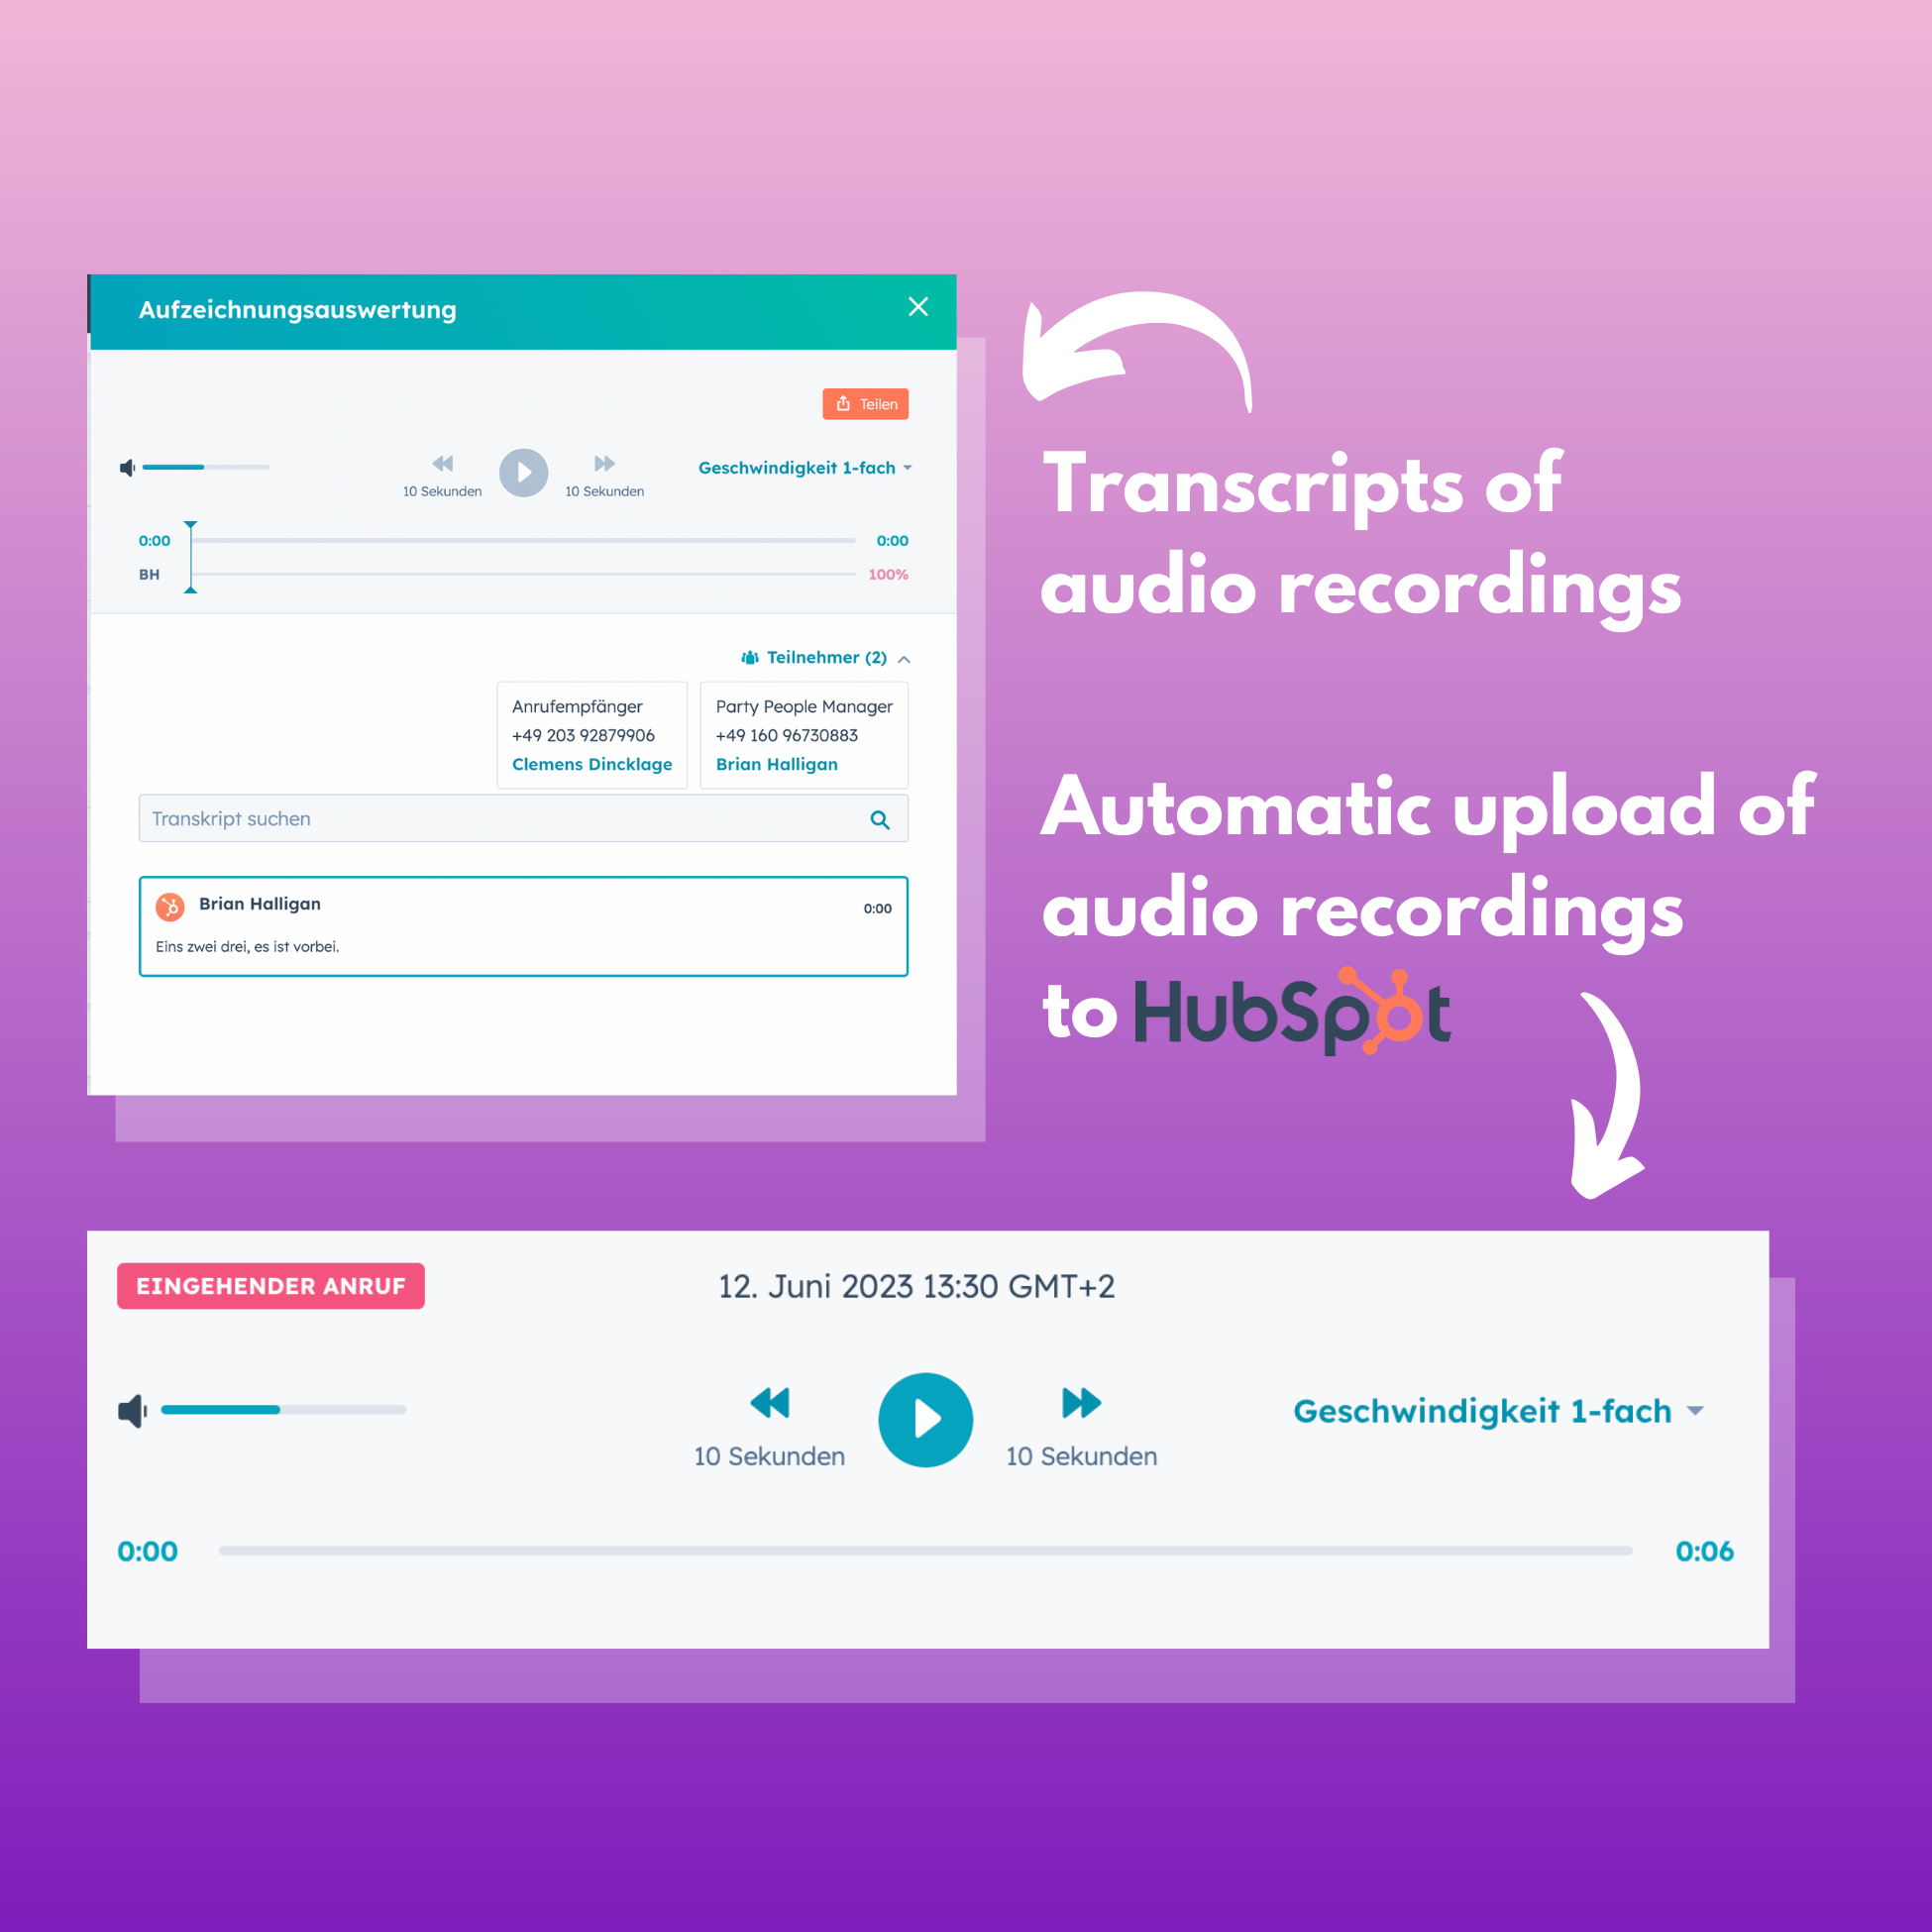 Automatic upload of audio recordings to HubSpot